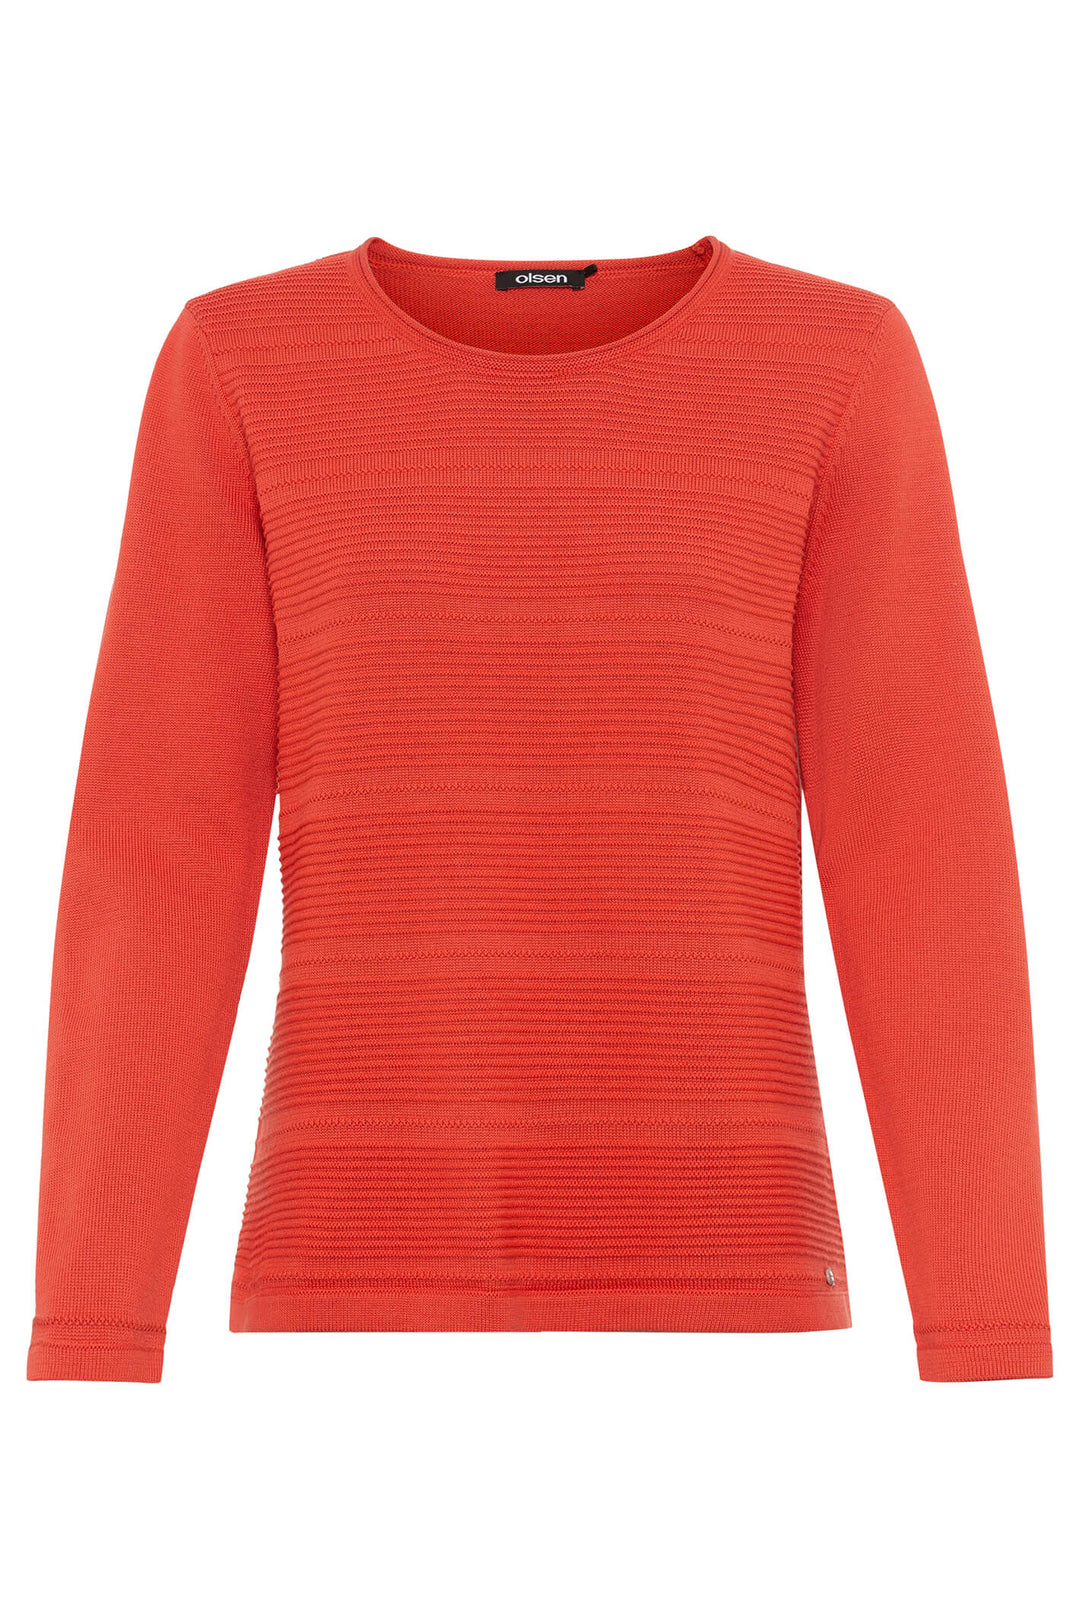 Olsen 11000755 Spiced Orange Ribbed Long Sleeve Jumper - Experience Boutique